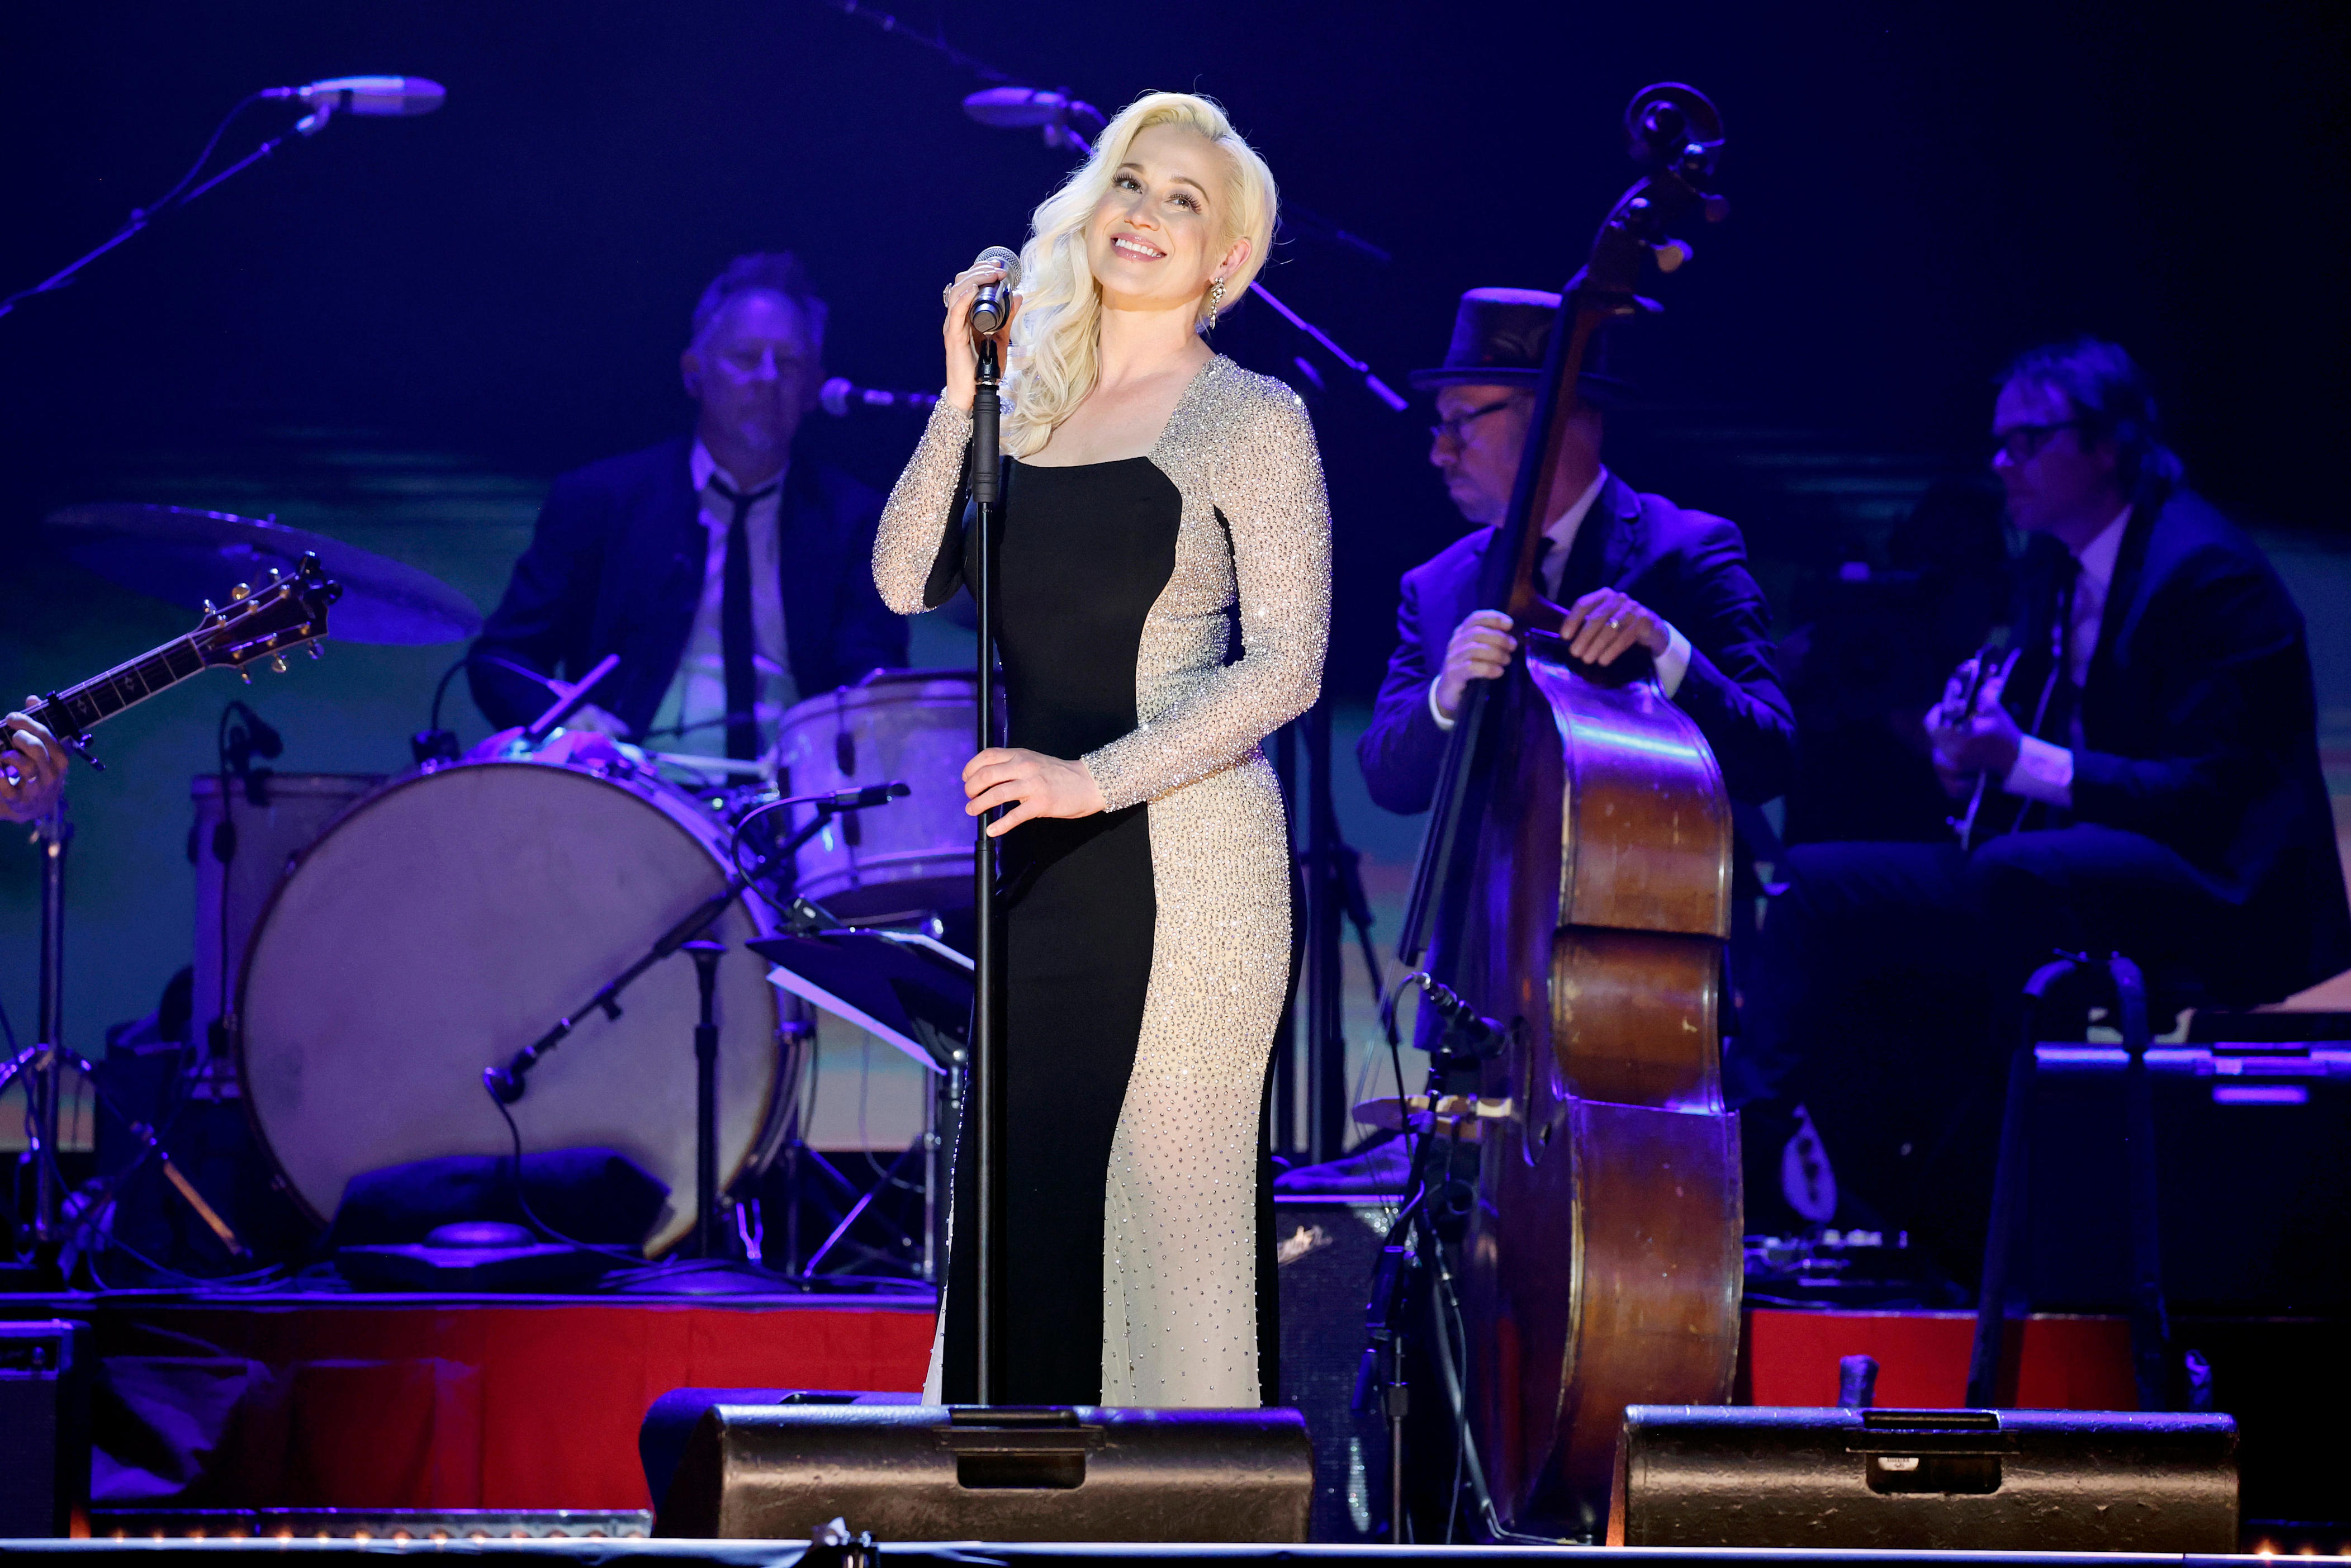 kellie pickler performs live for the first time since husband's death: 'he is here with us'